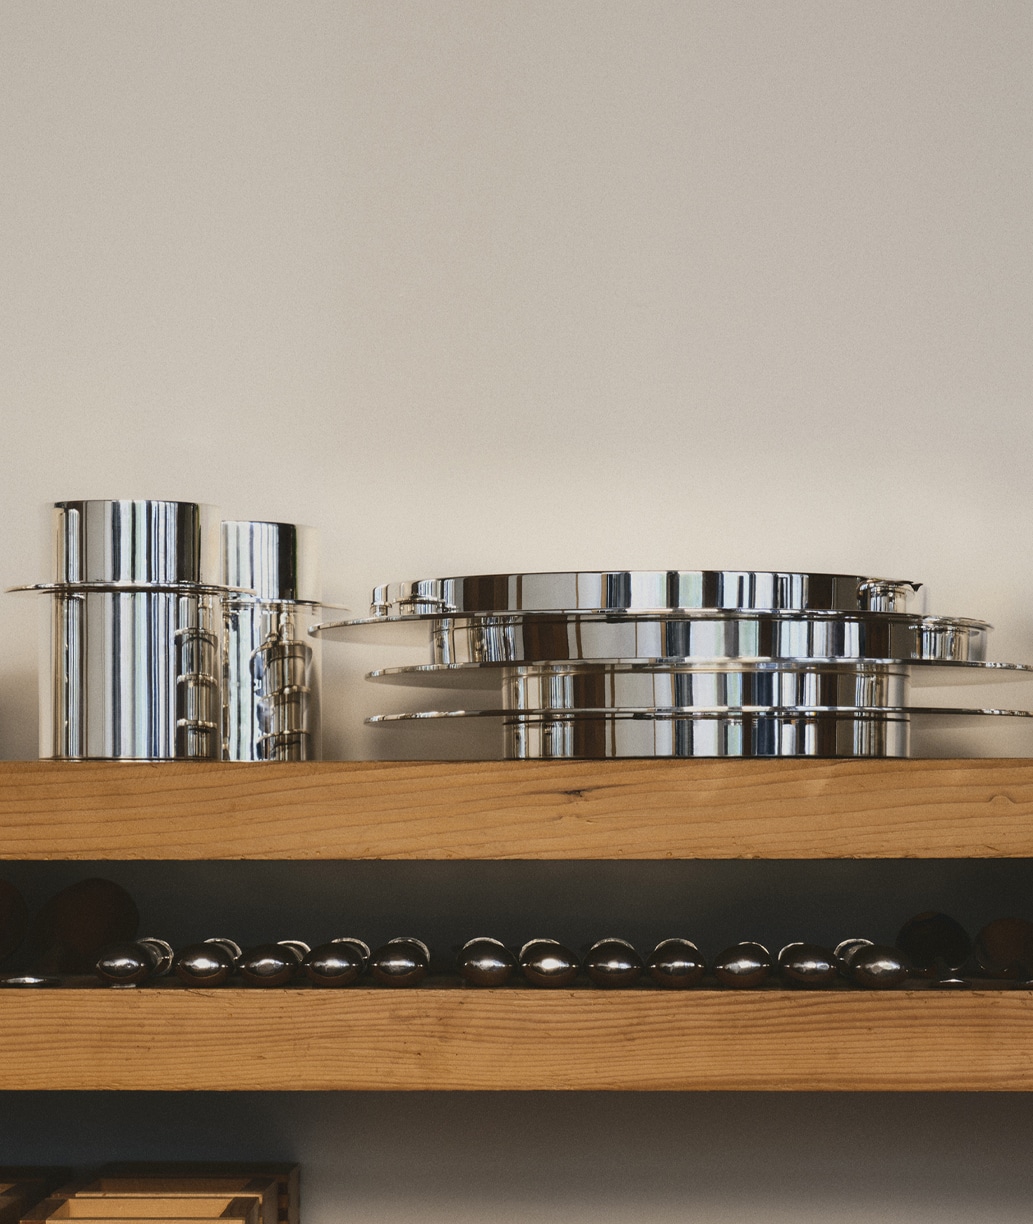 Pieces of the collection Dinner Service by Donald Judd photographed on a wood shelf with some pieces of cutlery on the down shelf